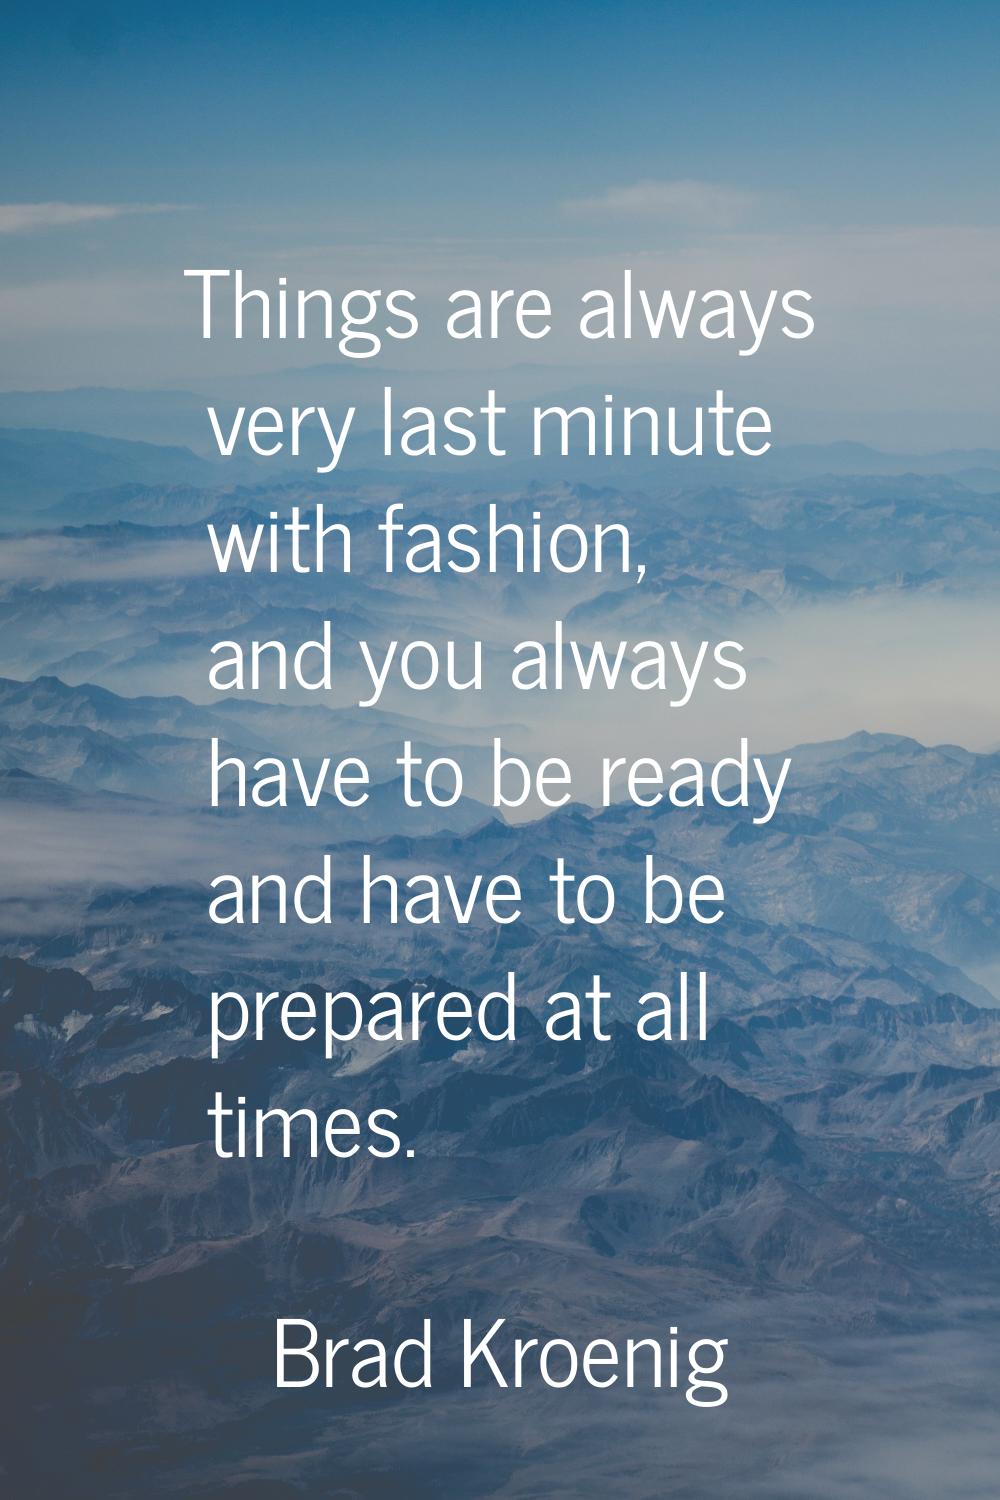 Things are always very last minute with fashion, and you always have to be ready and have to be pre